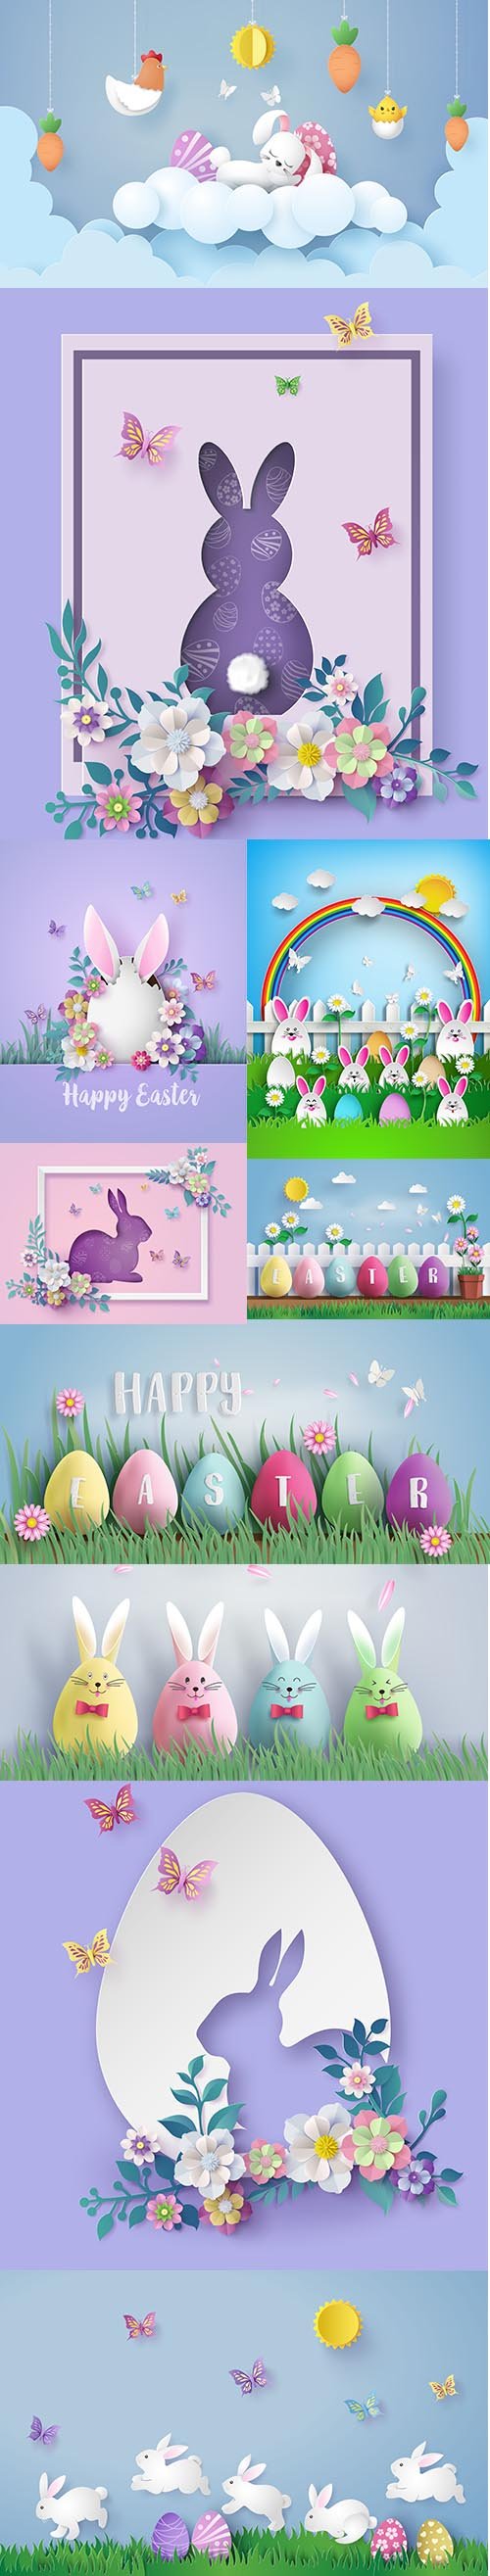 Easter Day Beautiful Illustration Vector Set